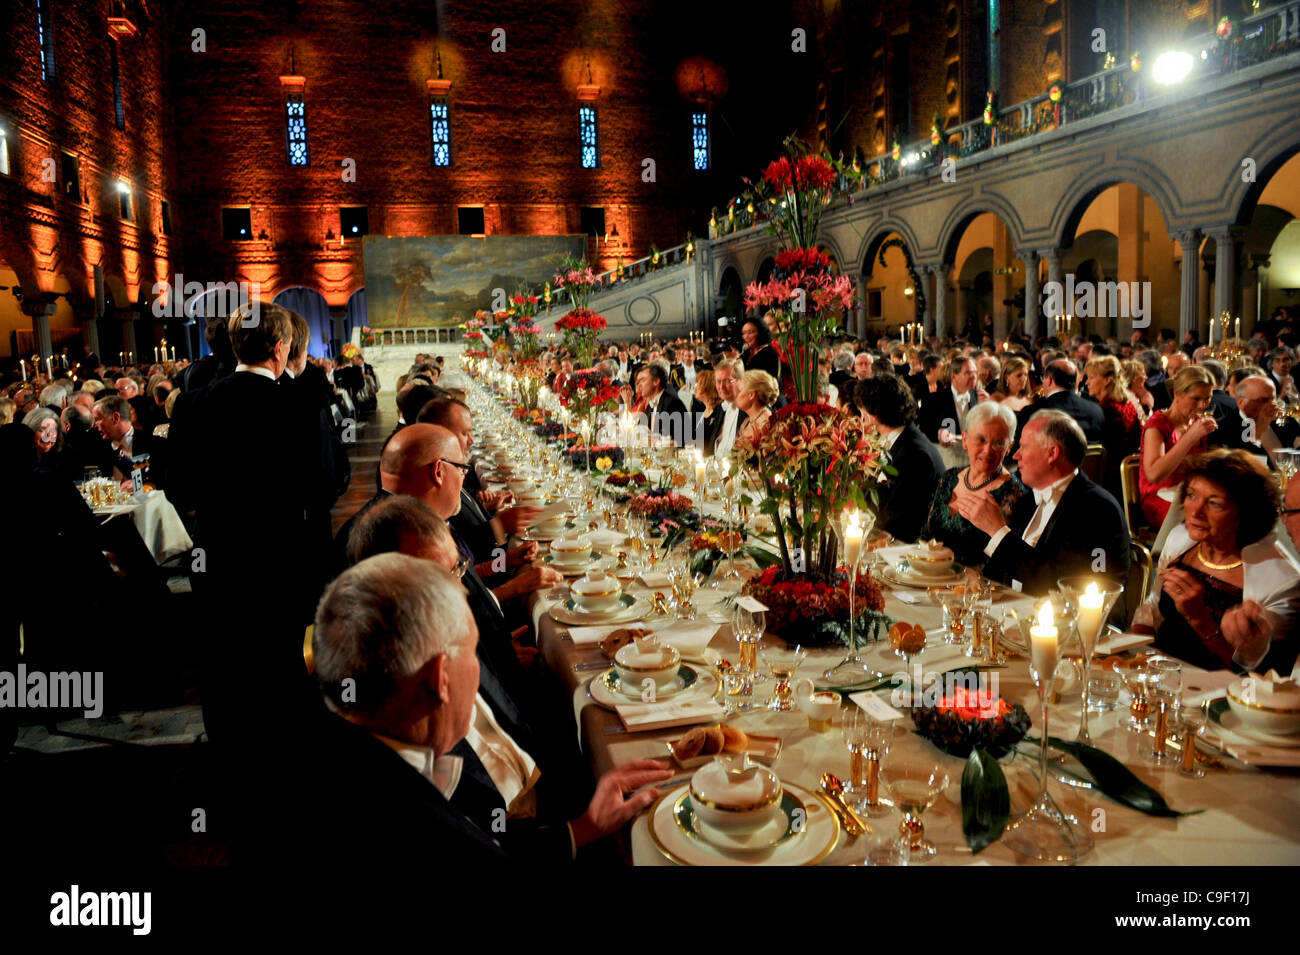 The gala dinner honoring the Nobel Prize Laureates in the Blue Hall in Stockholm City Hall on Saturday December 10th 2011 Stock Photo